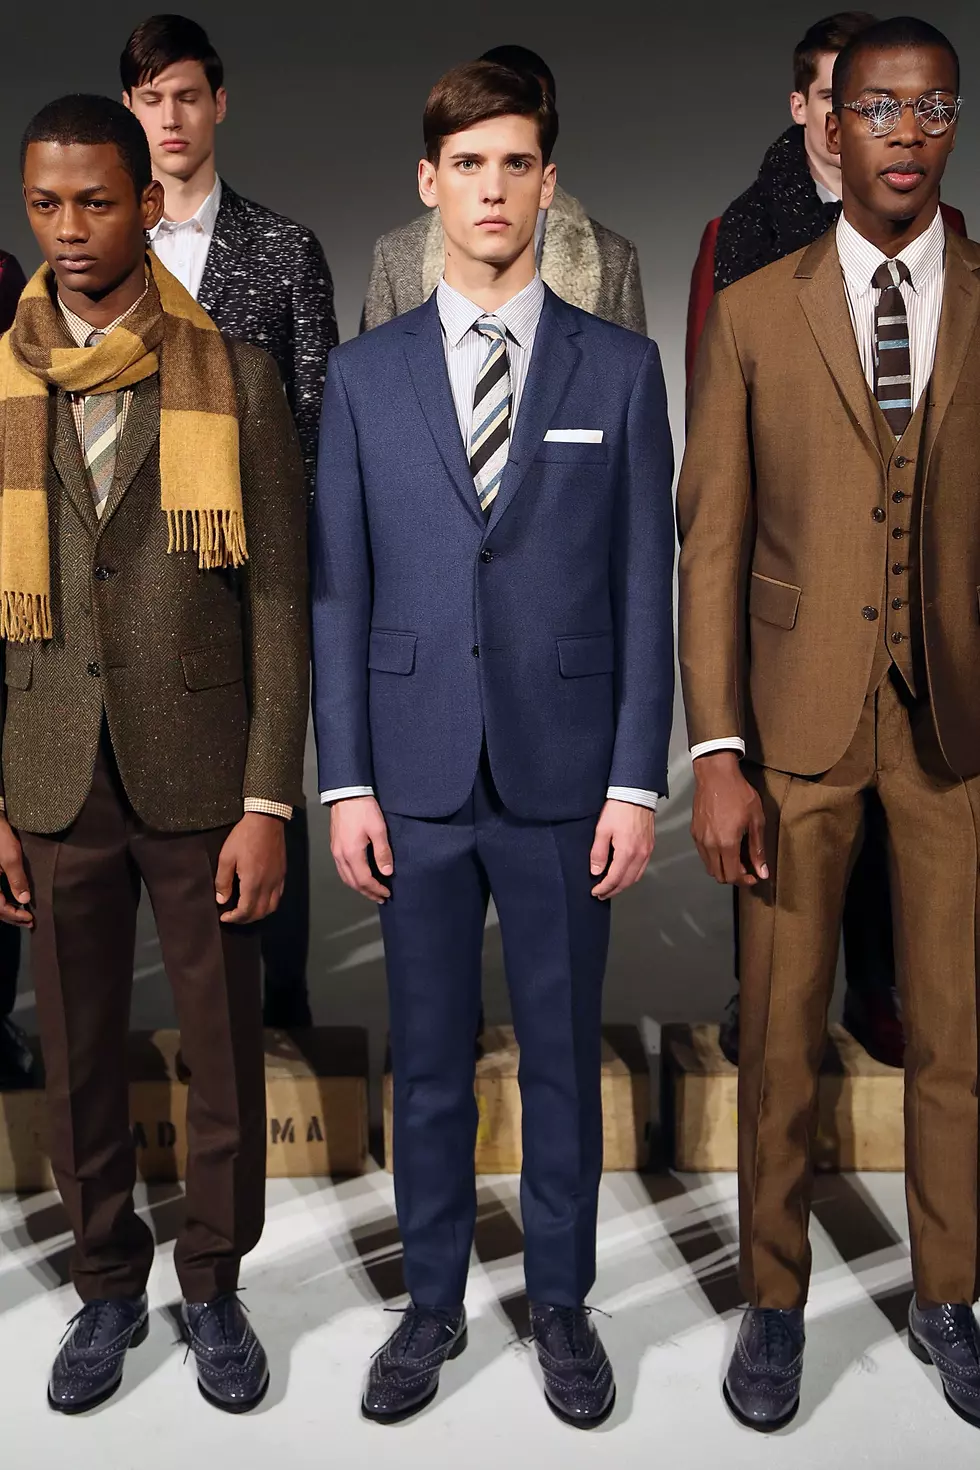 Seven Things Every Guy Should Know About Buying Suits [Video]